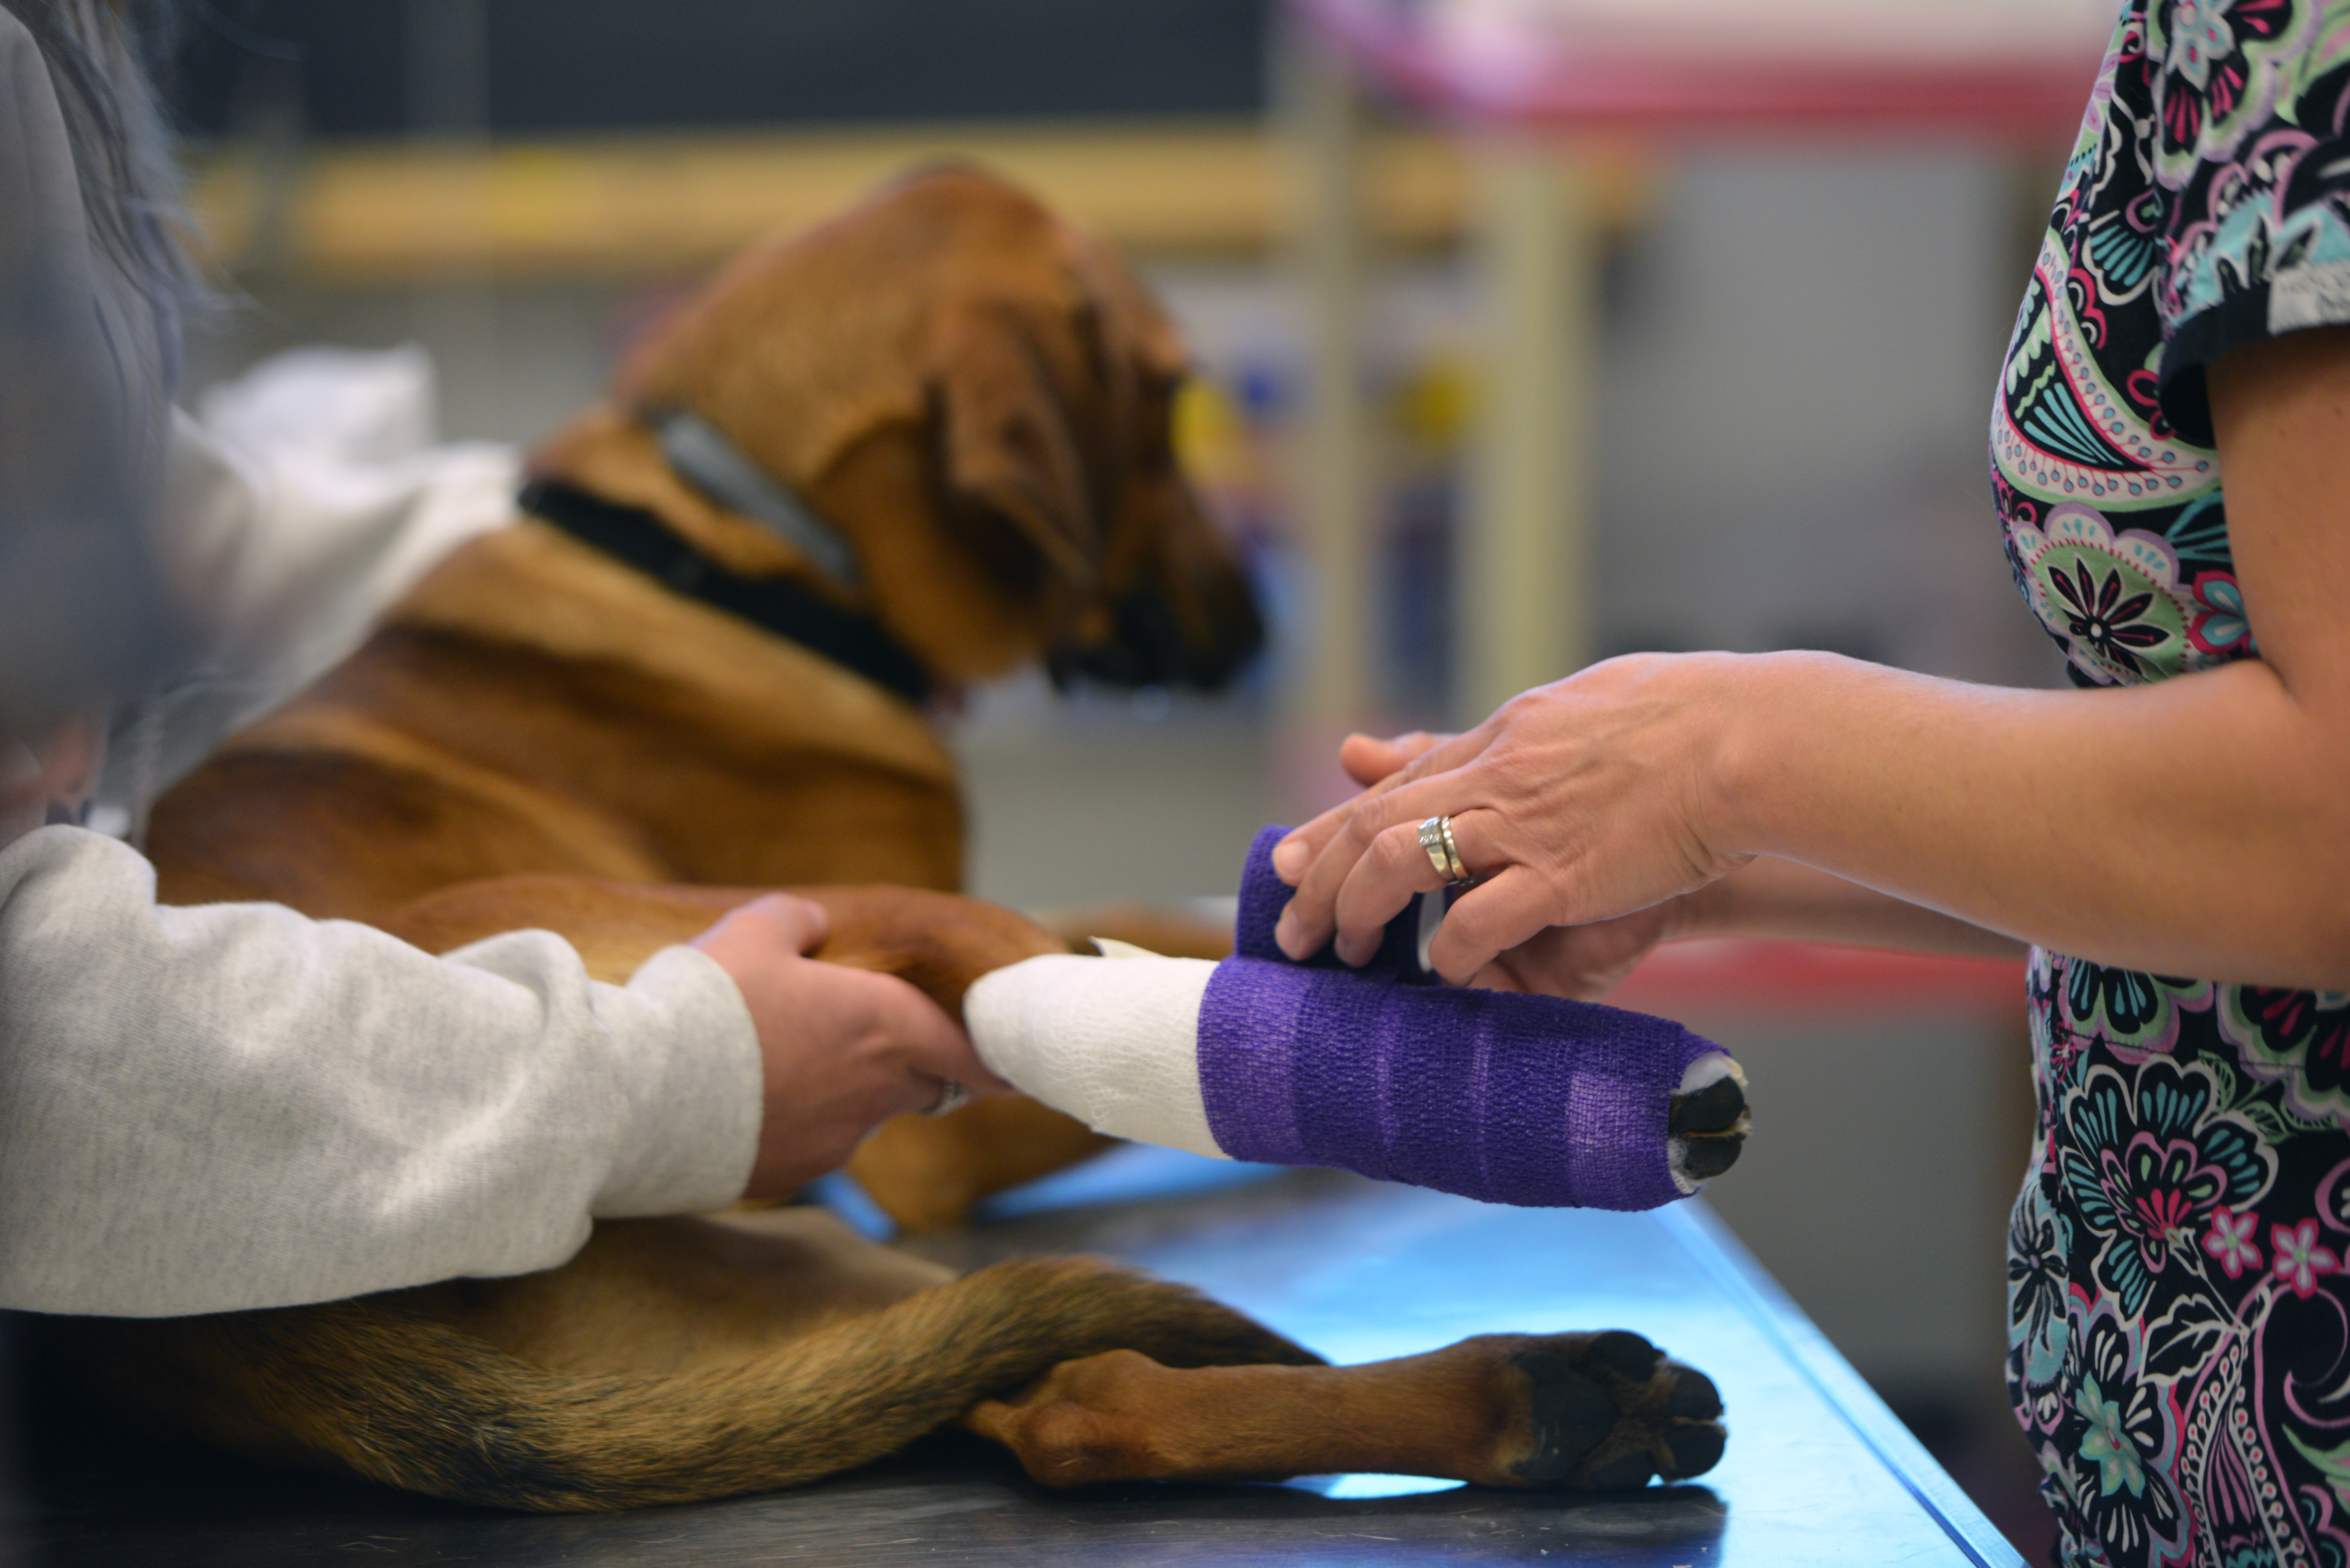 A brown dog has a cast applied to its foot